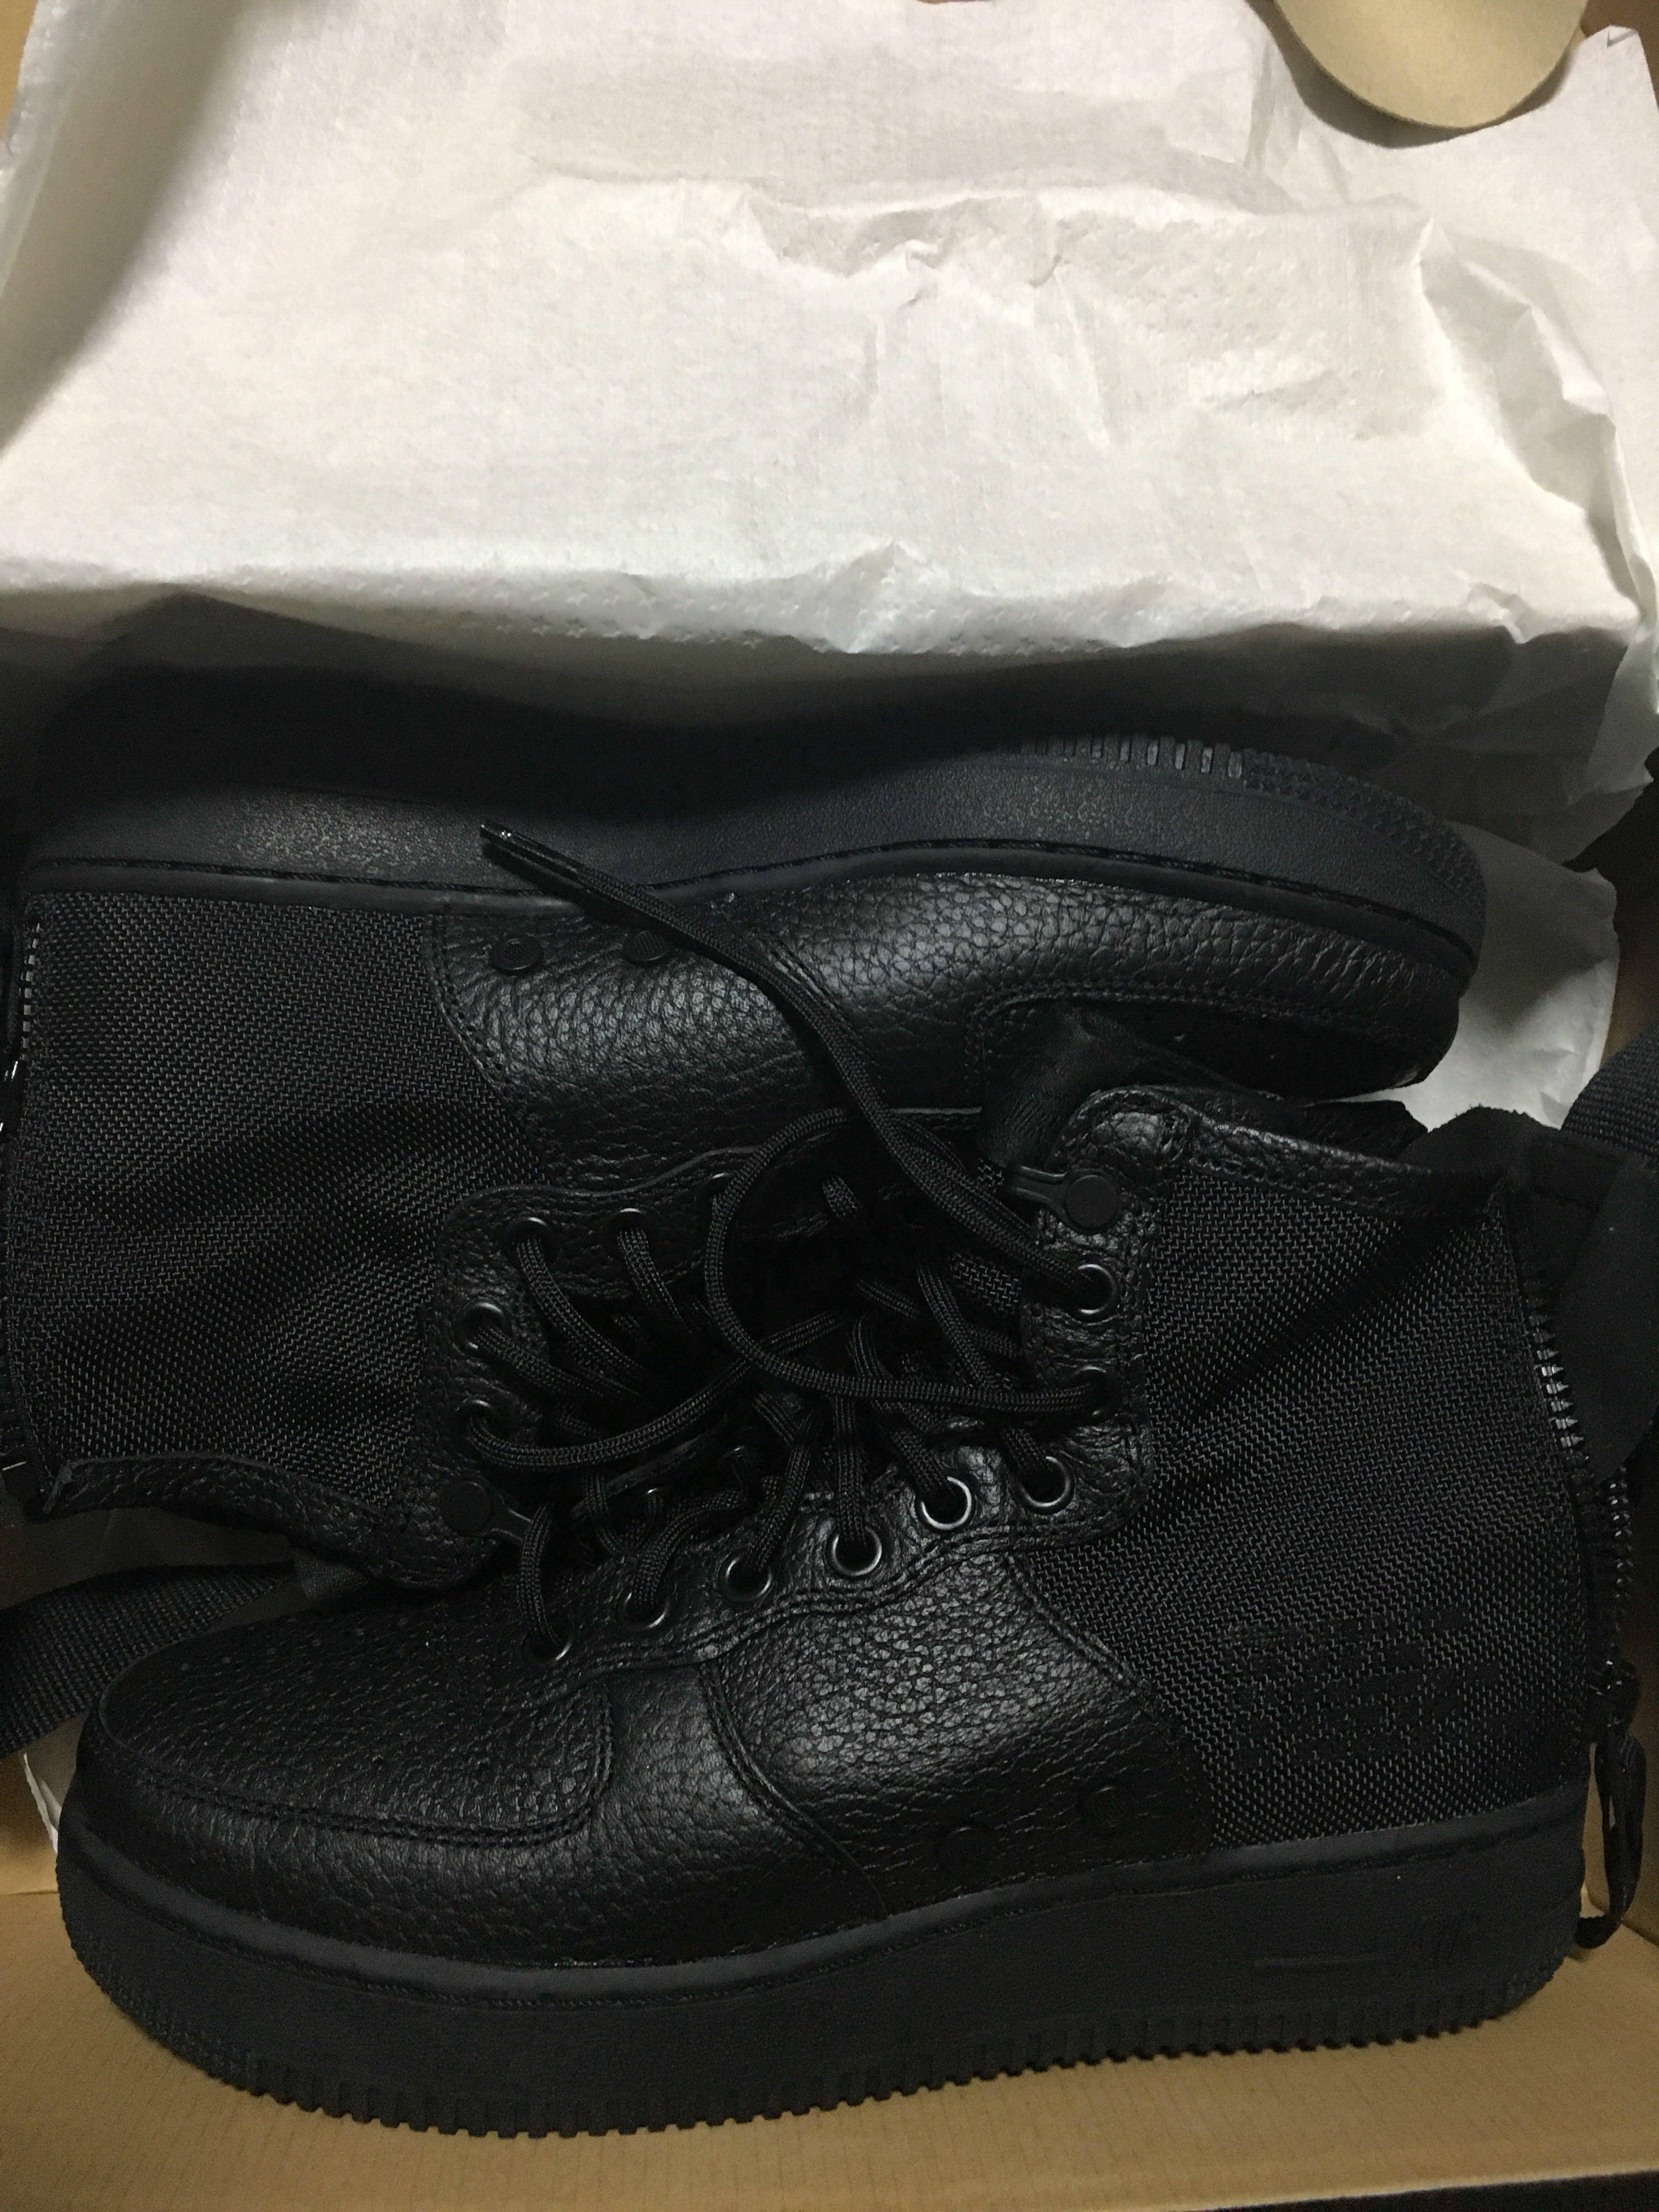 nike air force 1 boots black